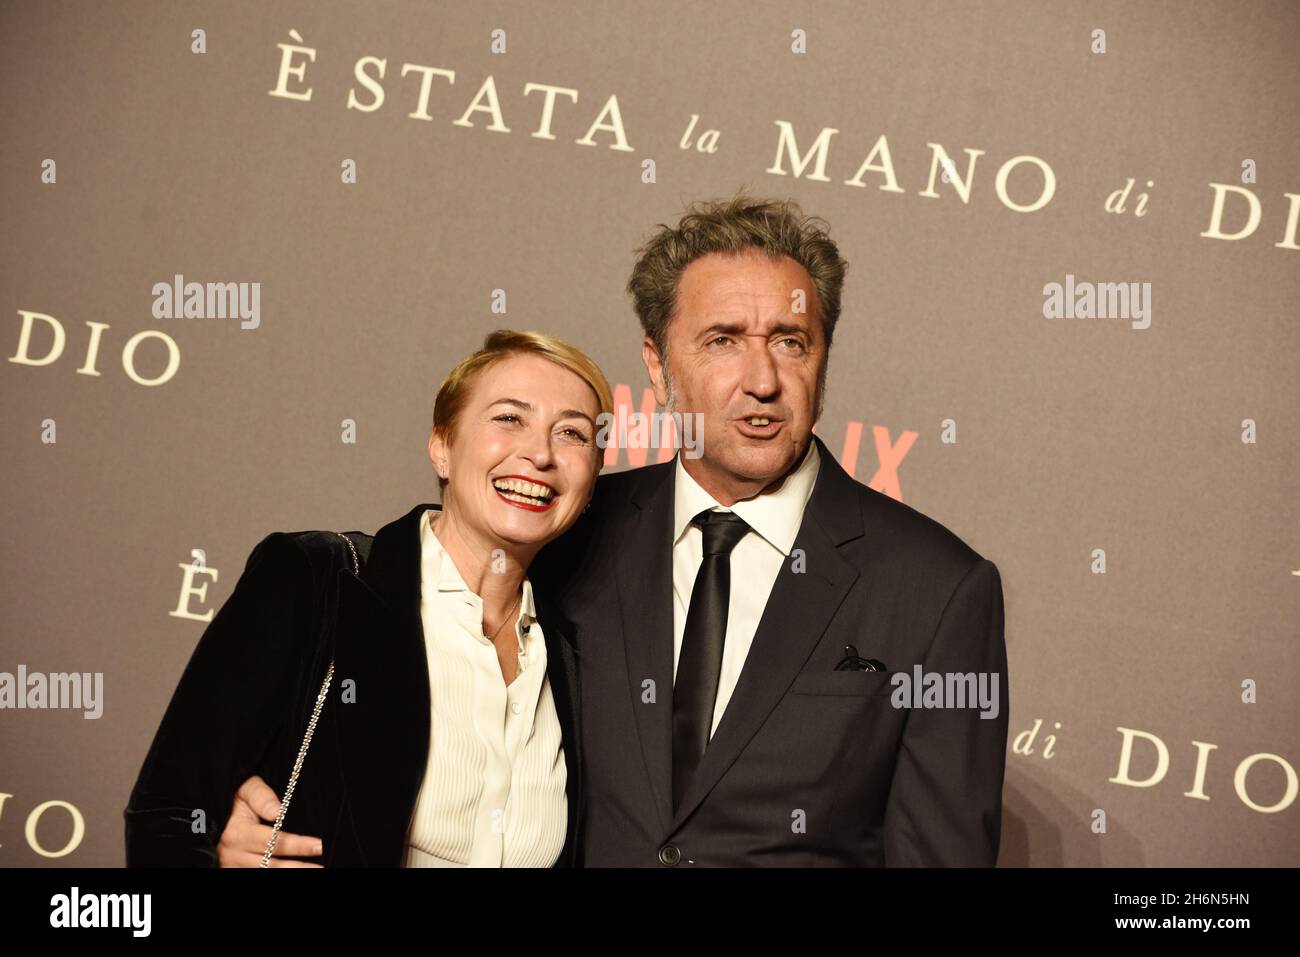 November 16, 2021, Naples, Campania, Italy: The director Paolo Sorrentino (R) side and on (L) side his wife Daniela D'Antonio, on the red carpet during the presentation of his last film '' E' stata la mano di Dio''. The last work of Sorrentino presented at Metropolitan Cinema of Naples, was candidate for 2022 Oscar Prize as the best foreign film. (Credit Image: © Pasquale Gargano/Pacific Press via ZUMA Press Wire) Stock Photo